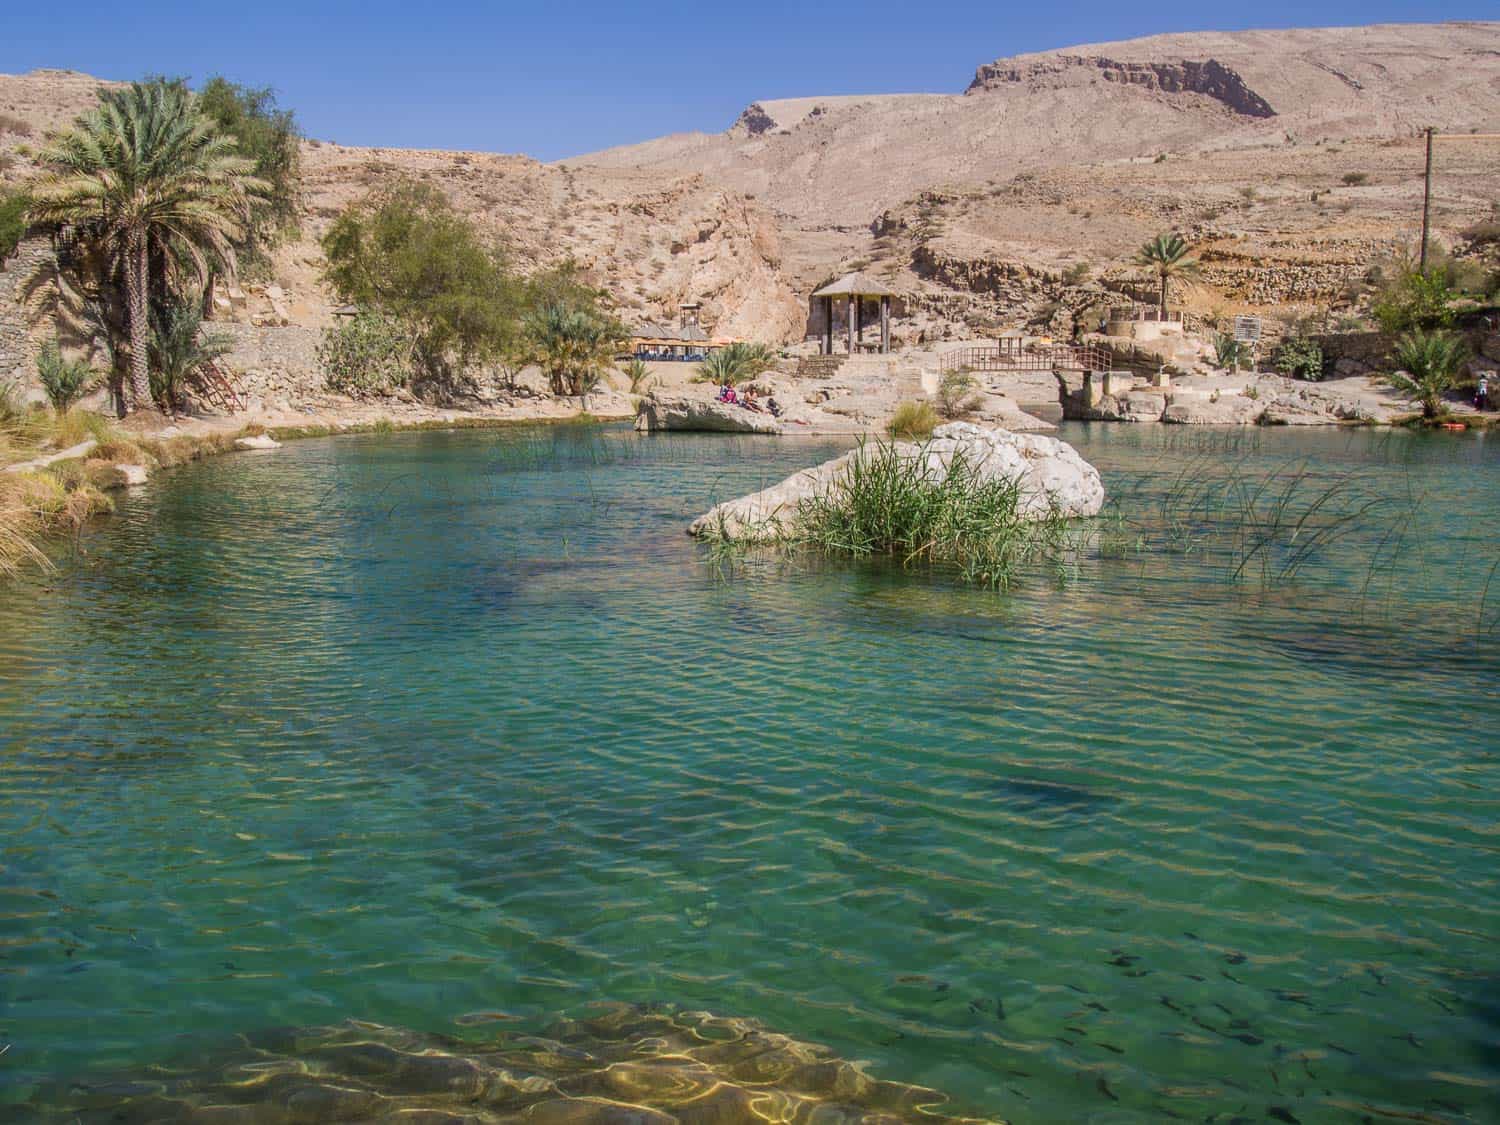 Wadi Bani Khalid in Oman: one of the stops on our Oman itinerary, a 10 day road trip around north Oman